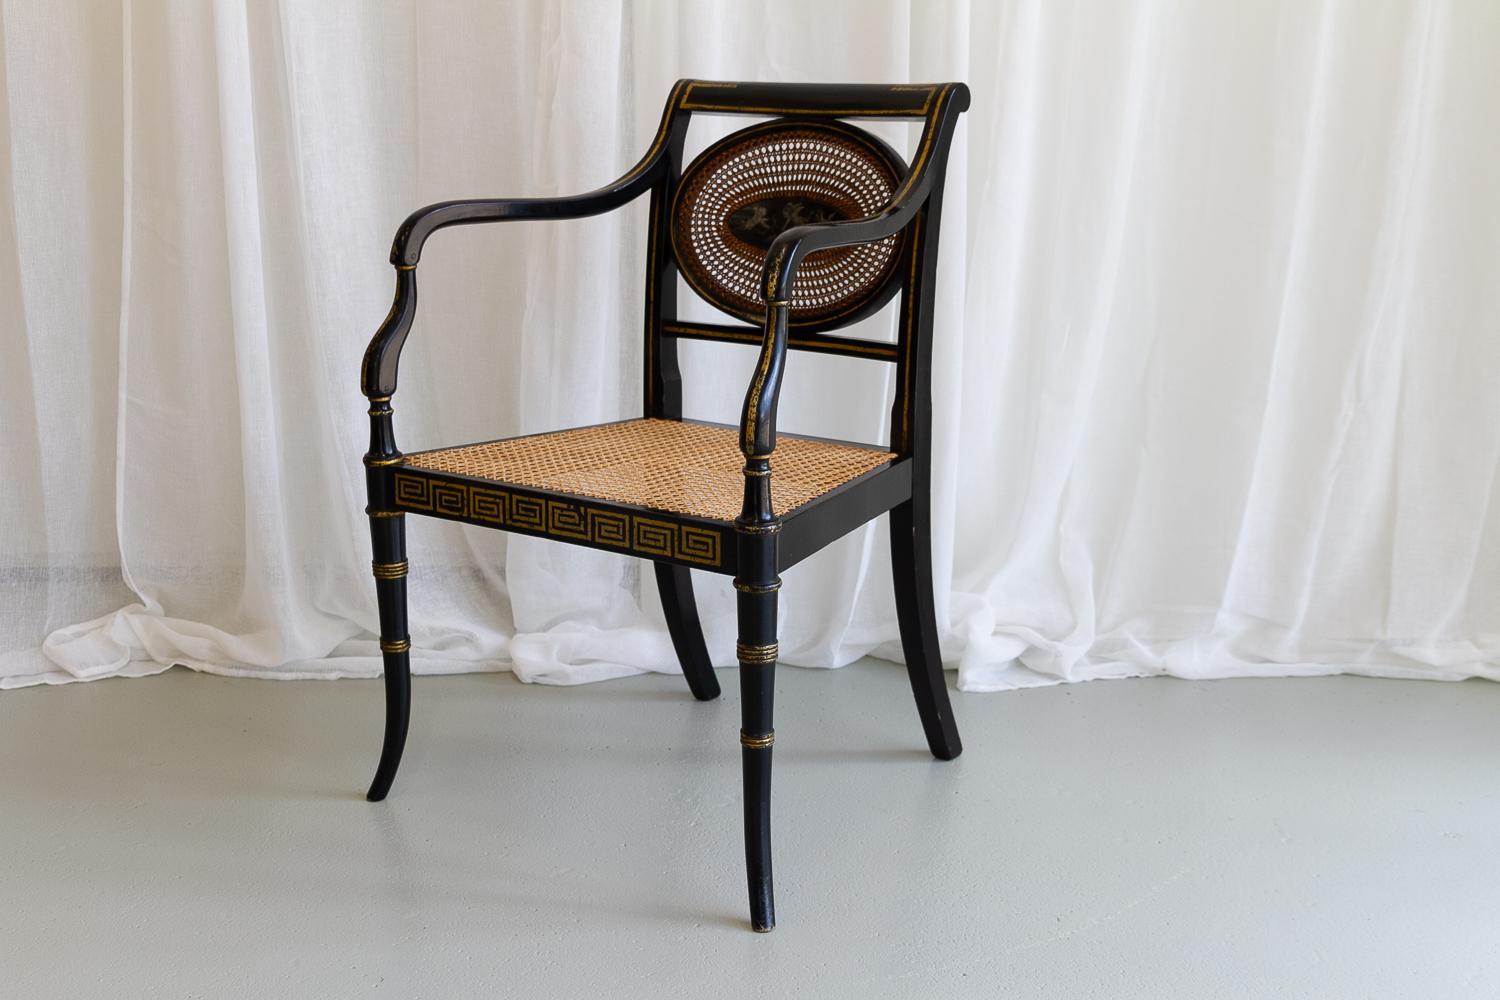 Cane English Regency Black and Gold Armchair, 19th Century.